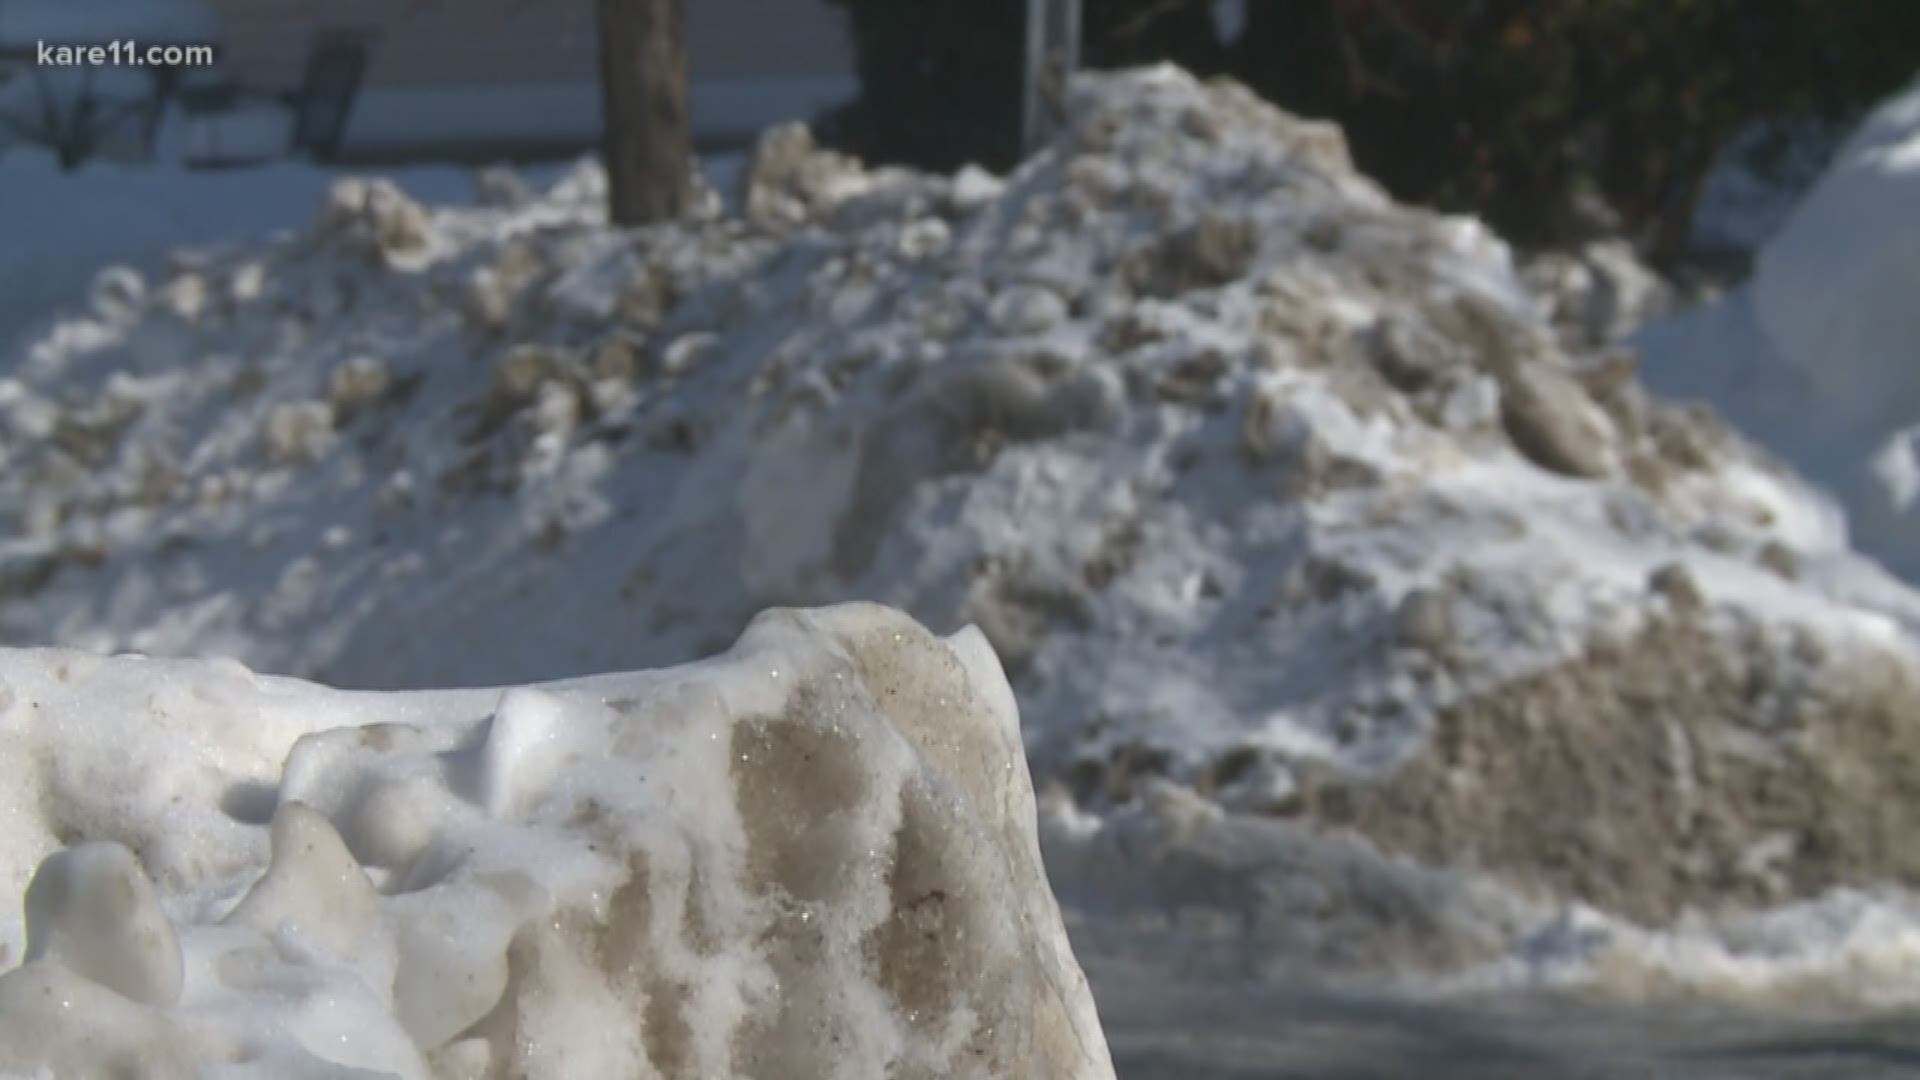 With 16,000 street corners and 1,040 miles of street, public works employees have been busy trying to keep Minneapolis roads clear. However, the snow this week could cause new problems. https://kare11.tv/2Xej1S0